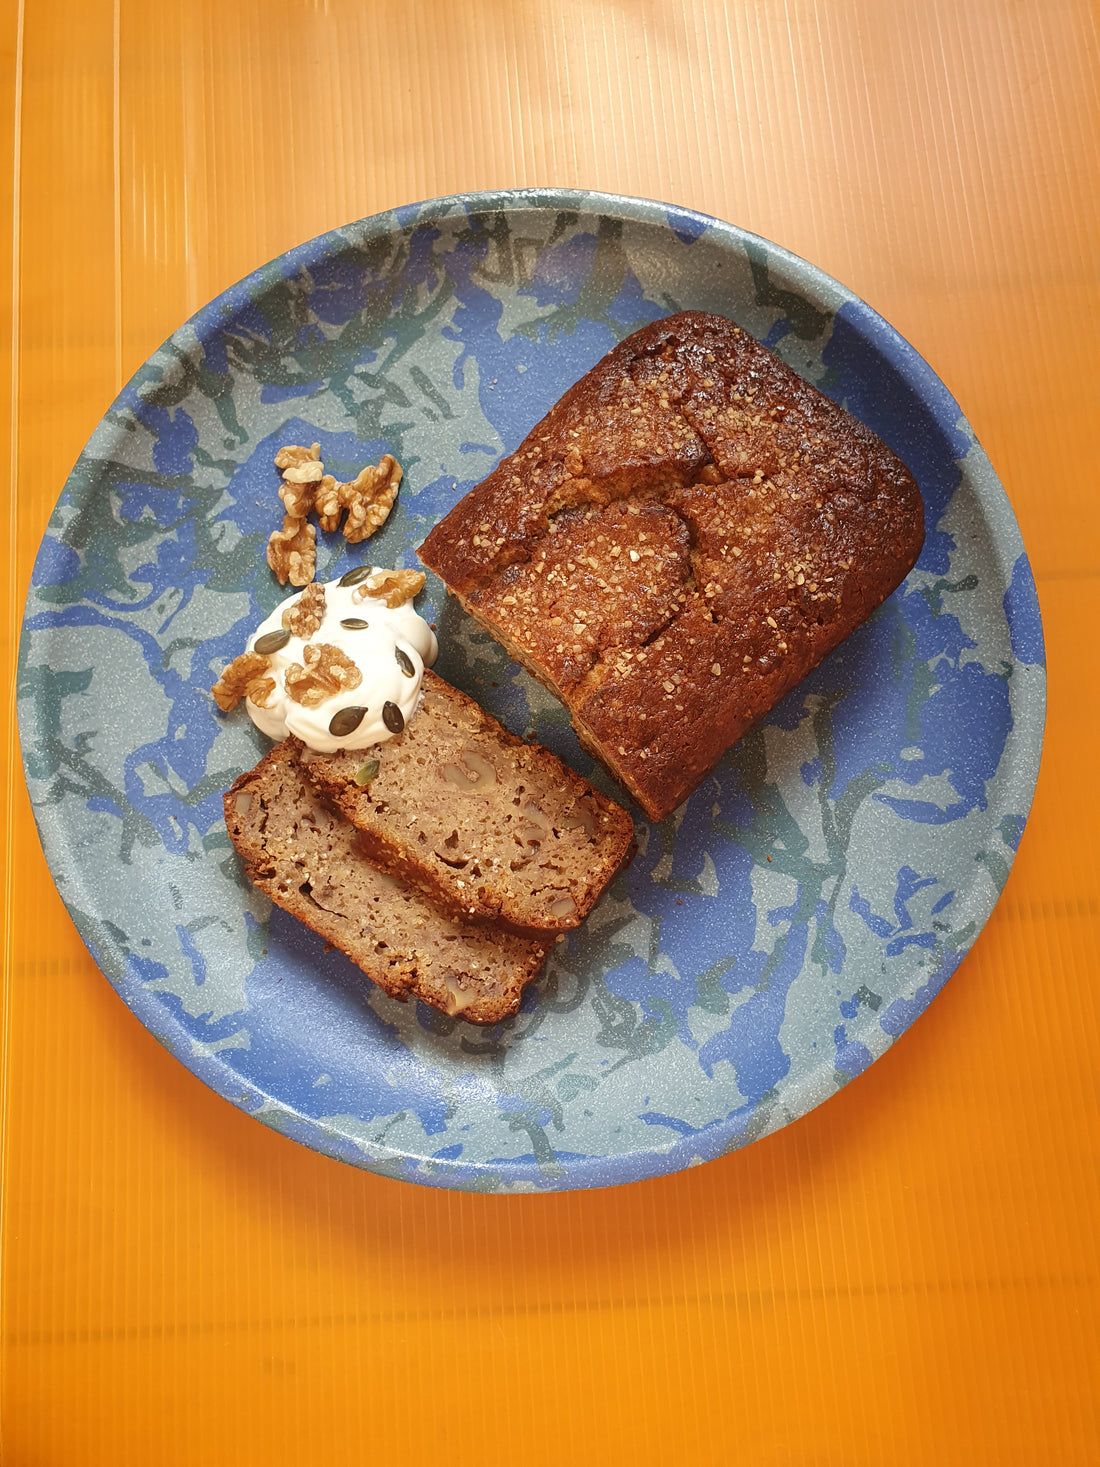  Ginger, Oat & Walnut Banana Bread with yoghurt and seeds